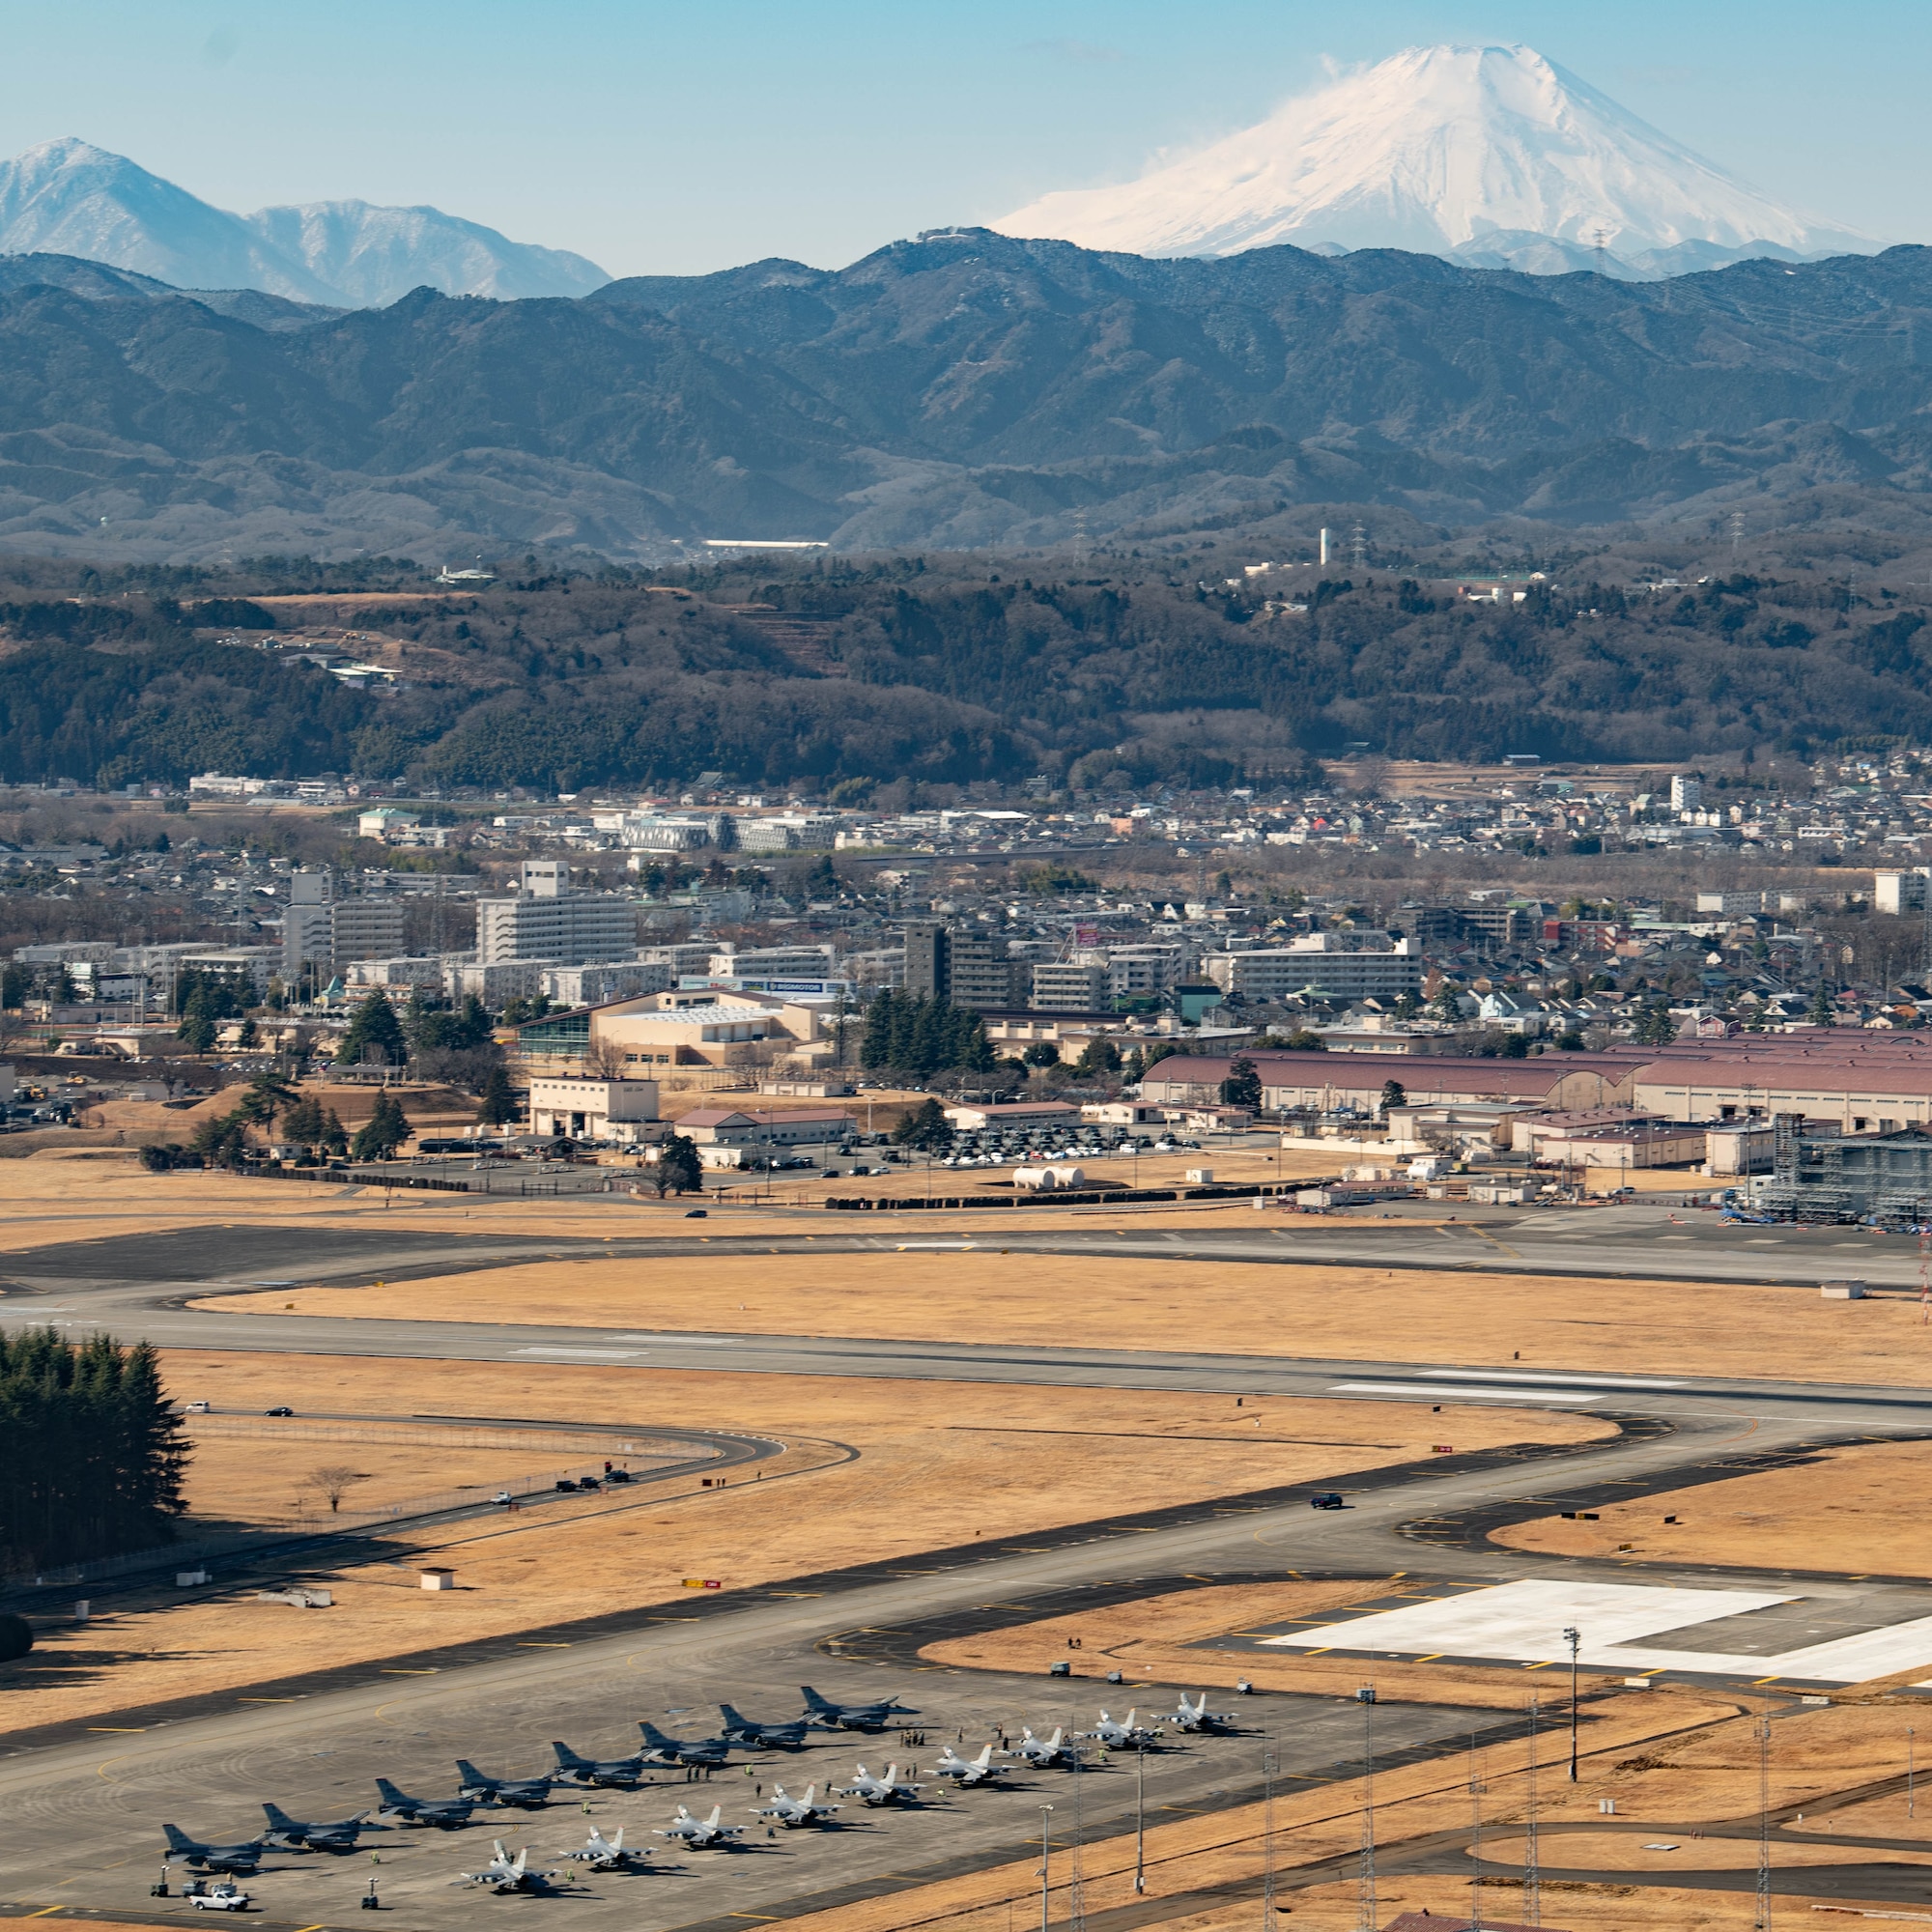 Wide photo of the Yokota Flightline and the city behind it, with mountains beyond that. 15 F-16s sit on the flightline in the foreground.